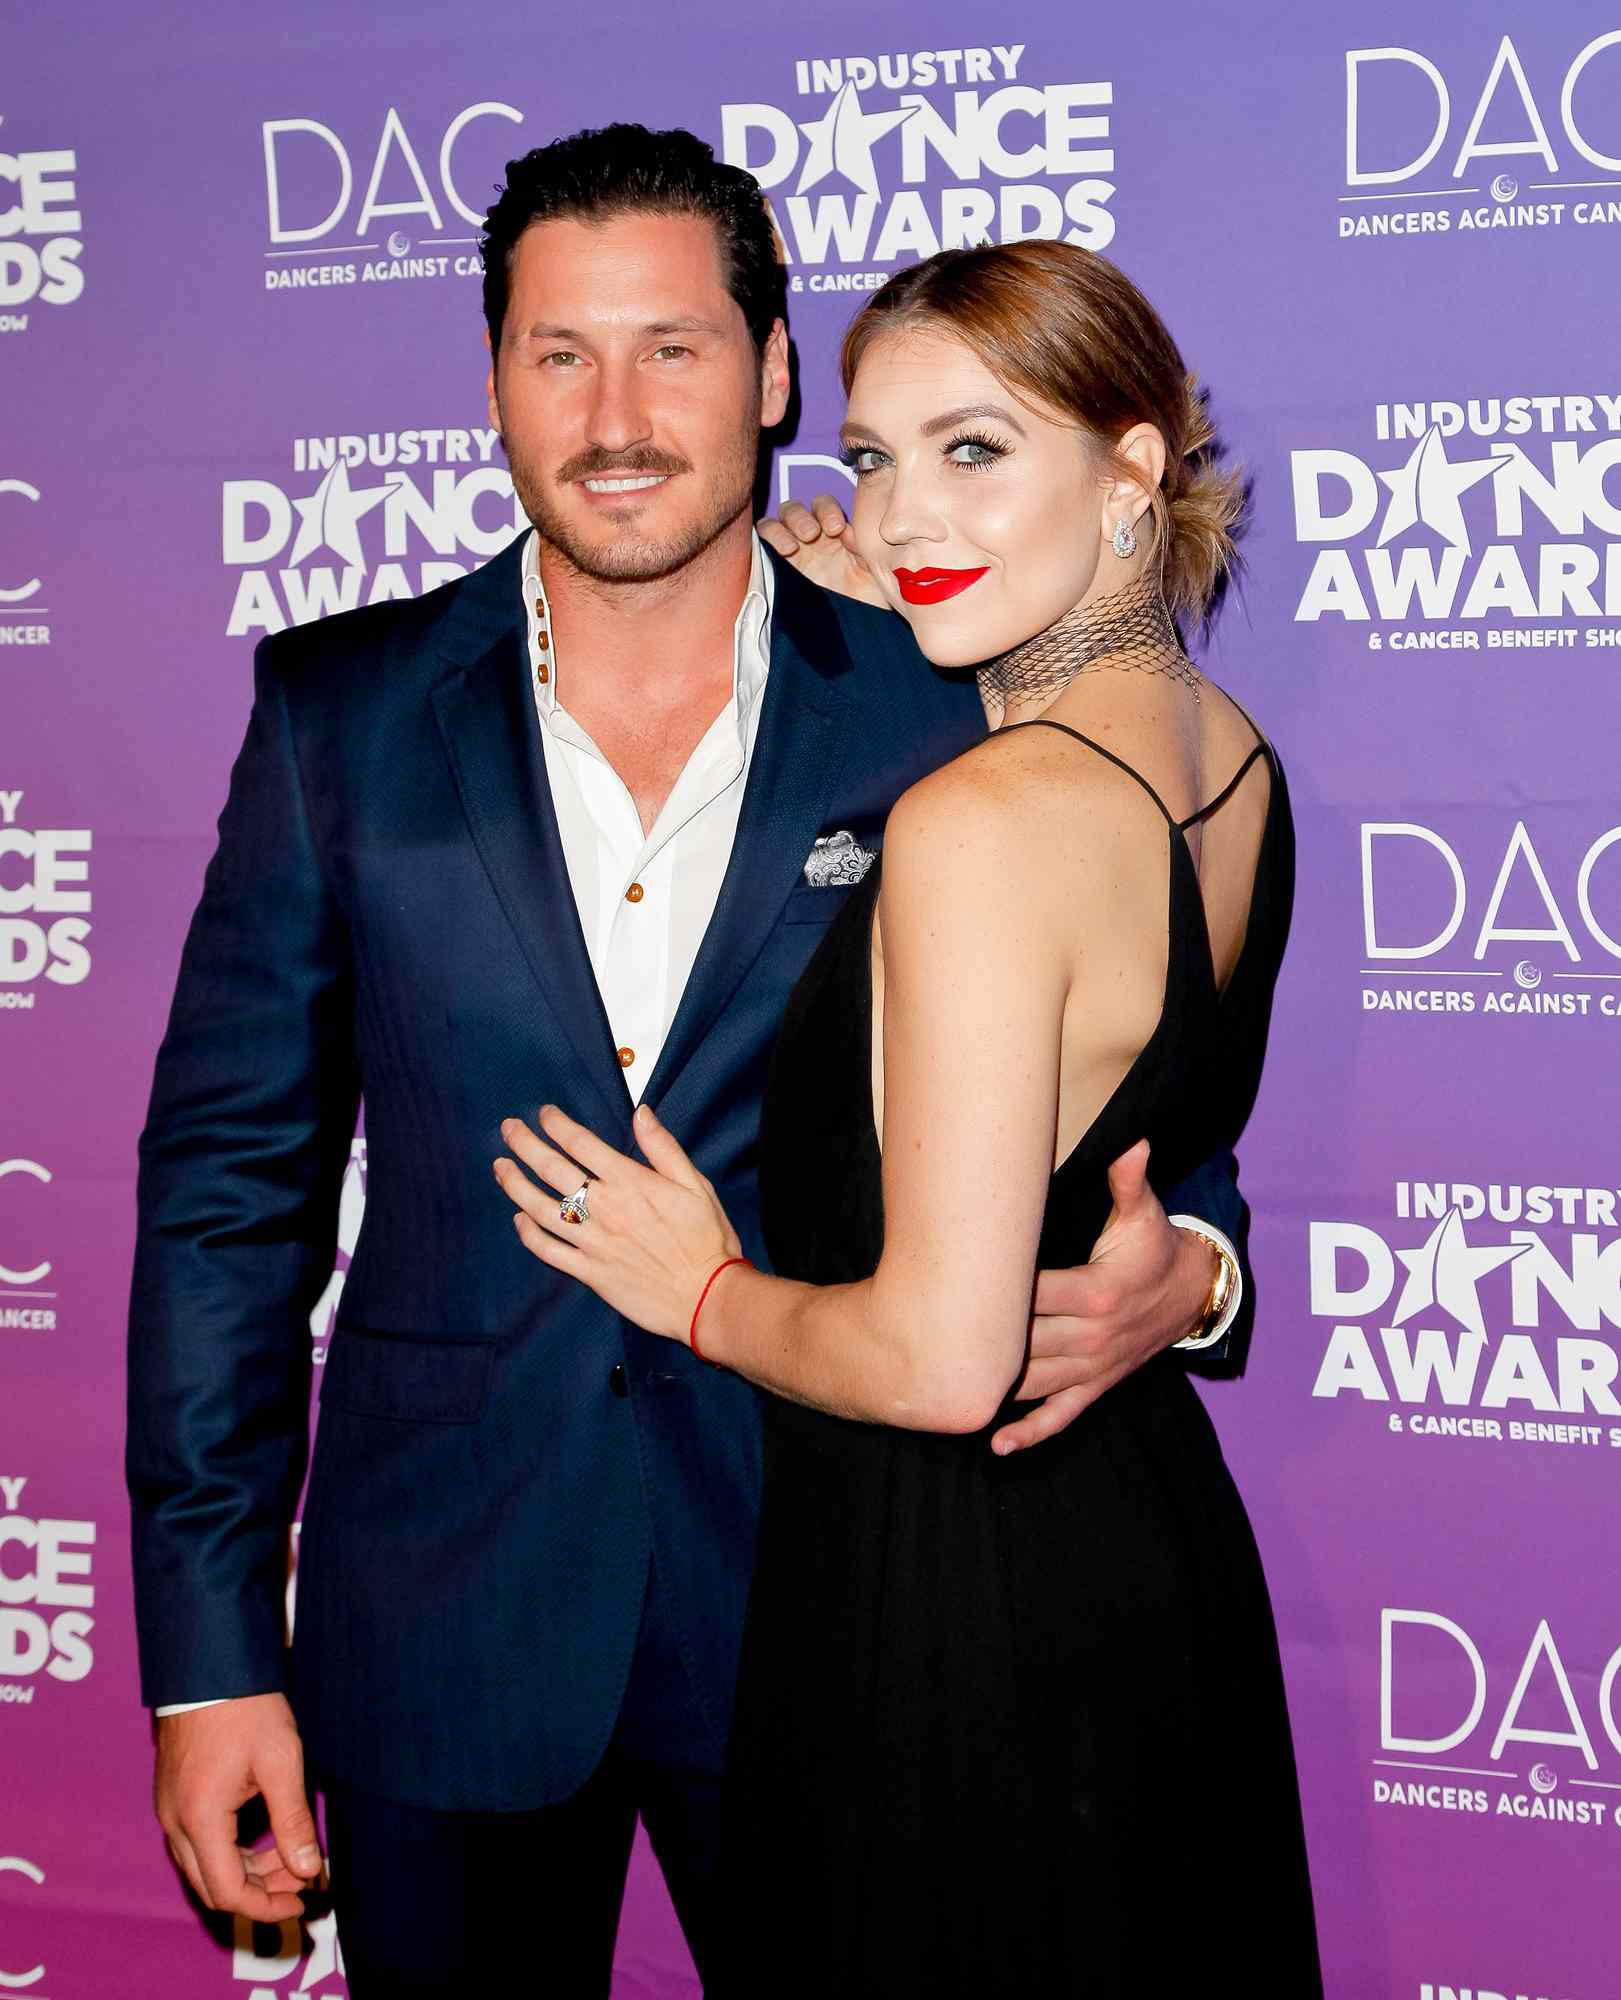 Val Chmerkovskiy and Jenna Johnson attend the 2017 Industry Dance Awards and Cancer Benefit Show at Avalon on August 16, 2017 in Hollywood, California.